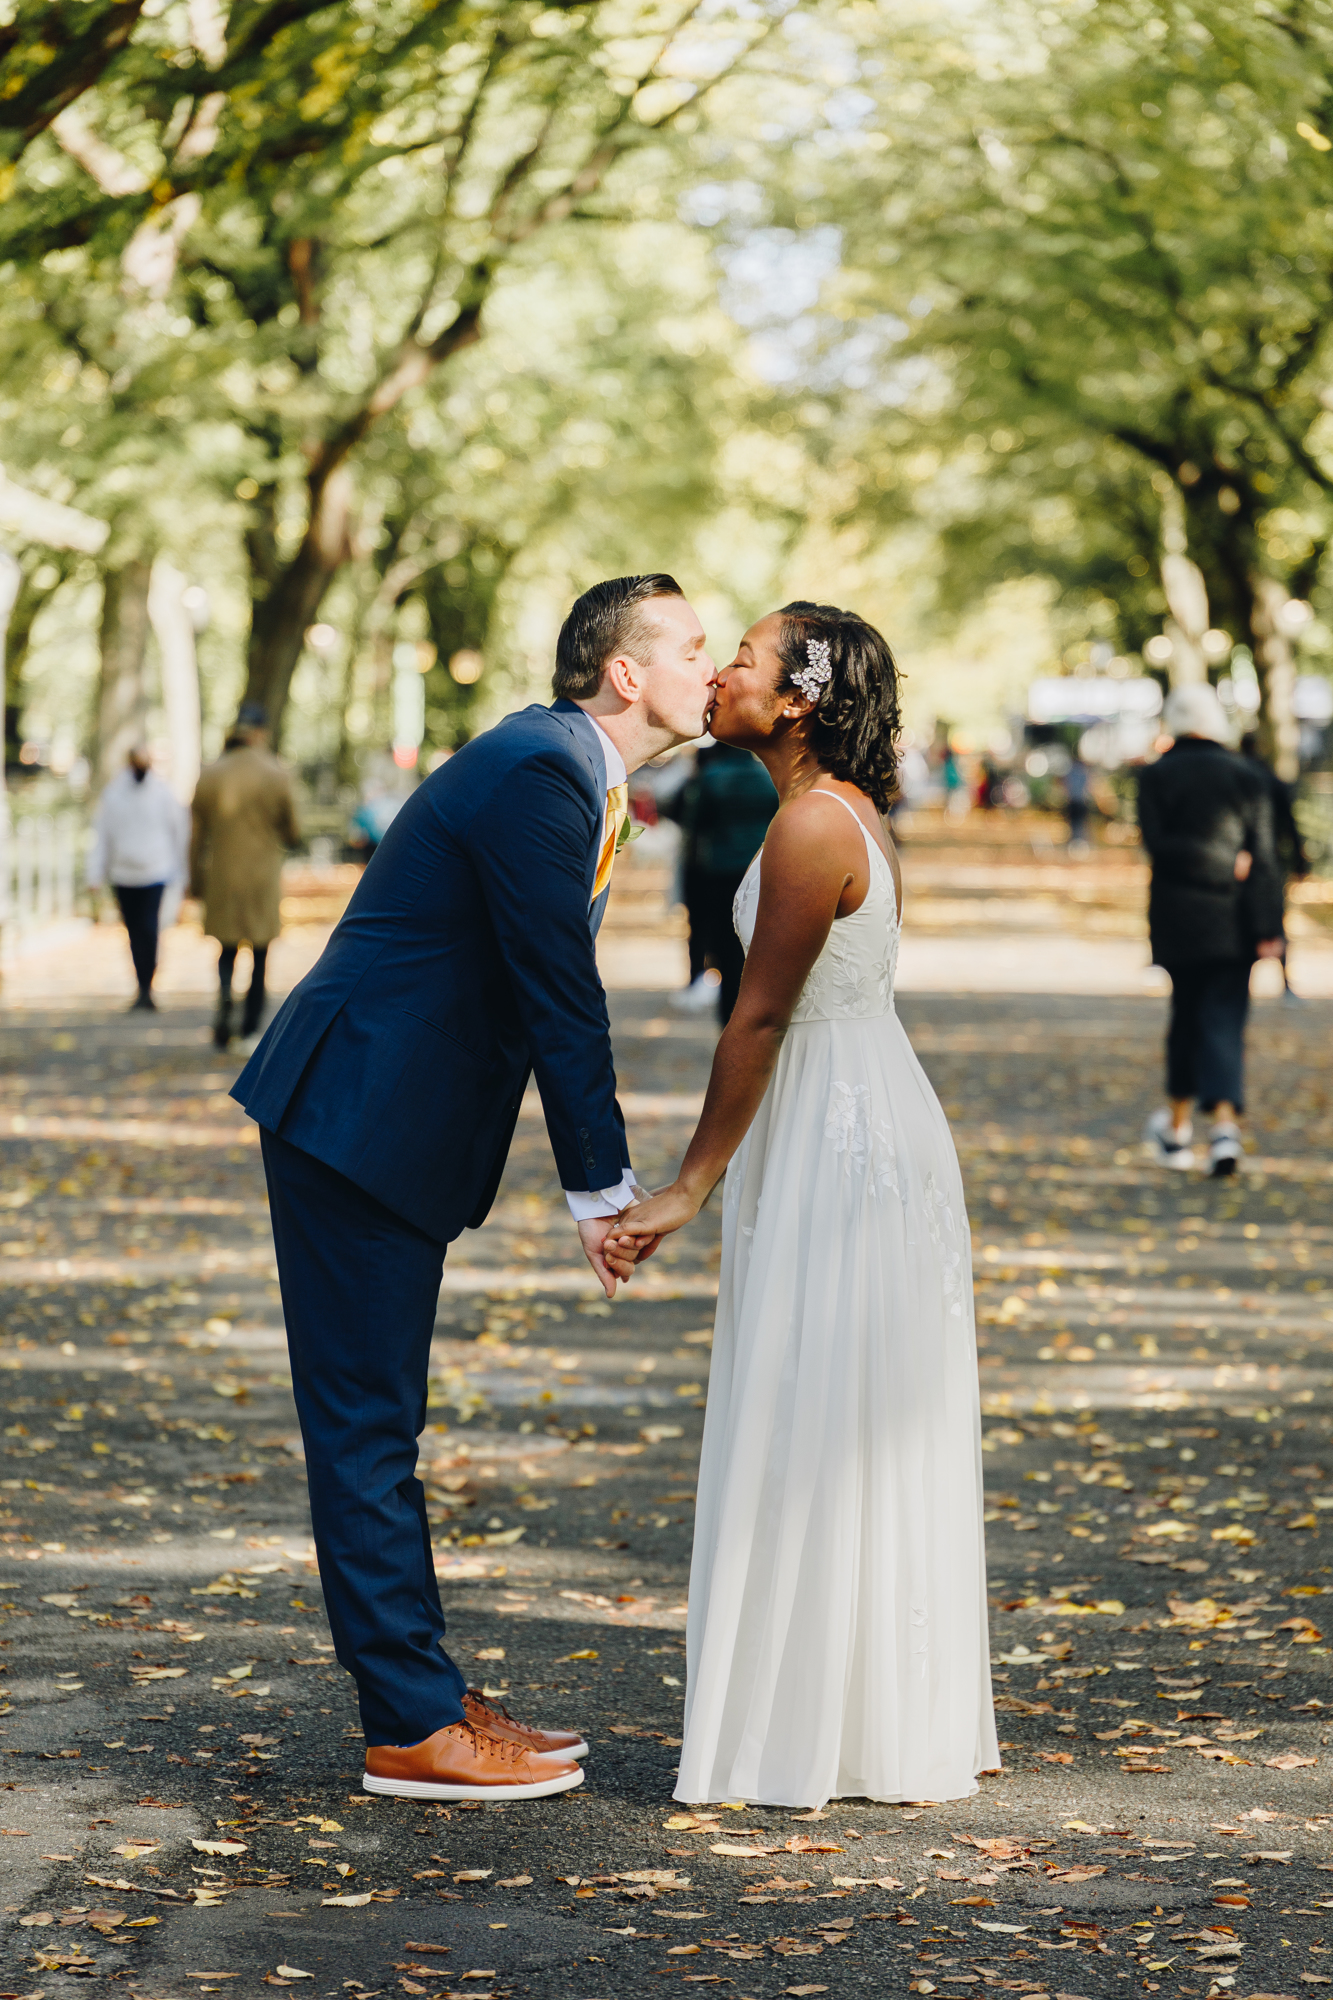 Romantic Central Park Elopement Photos in NYC